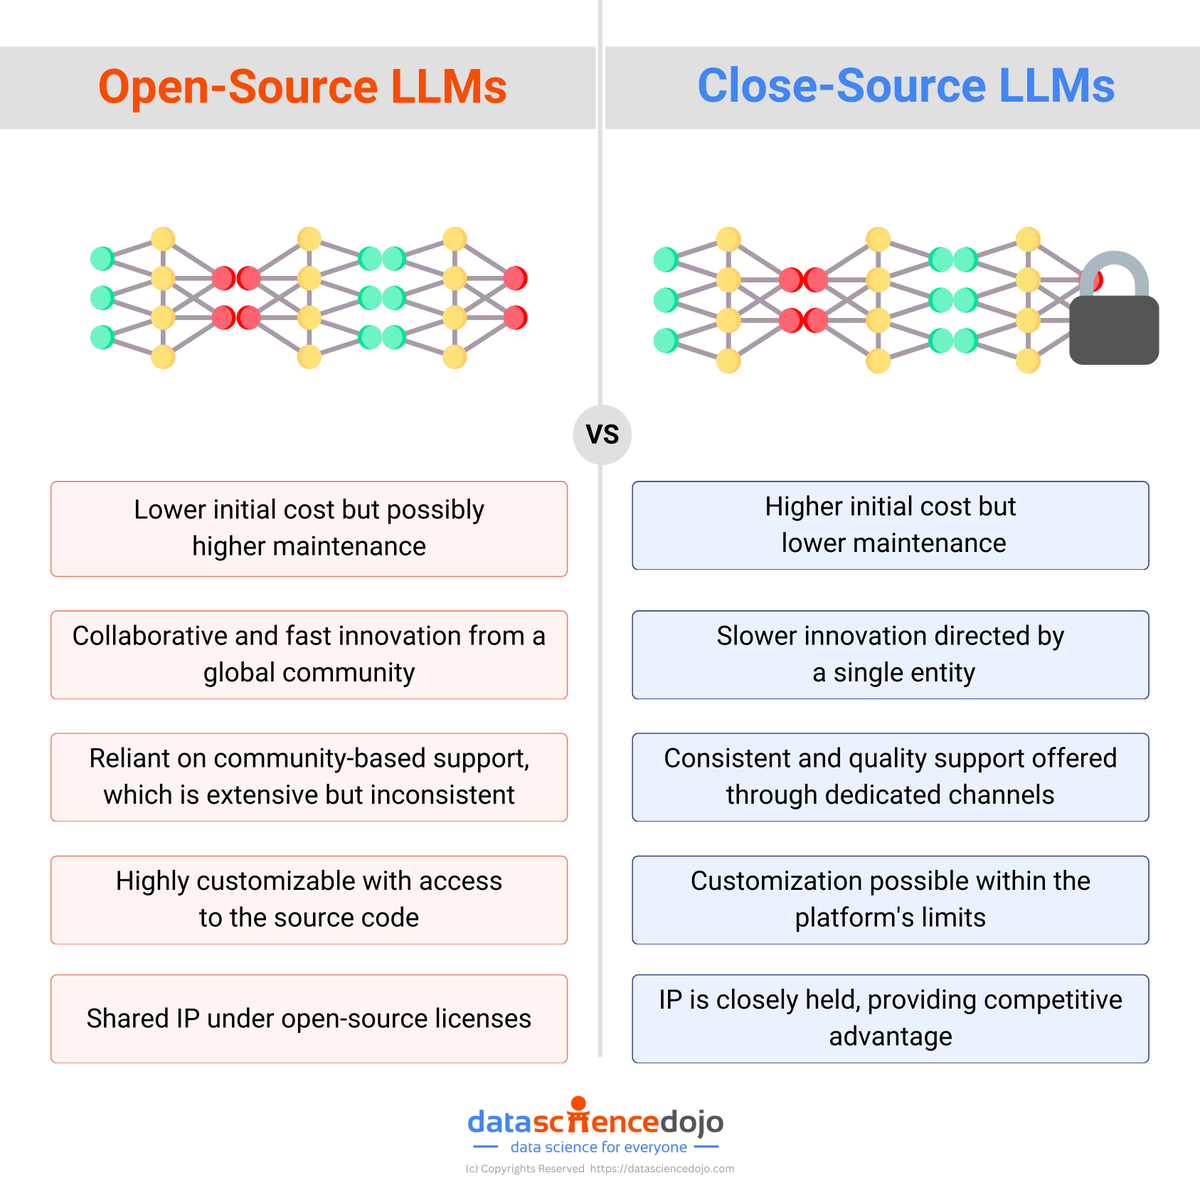 Selecting the ideal model is one of the most important decisions enterprises are making today. It is essential to understand what kind of language model suits your use case the best. Read more about open-source LLMs Vs. close-source LLMs: hubs.la/Q02xgWYT0 #opensource